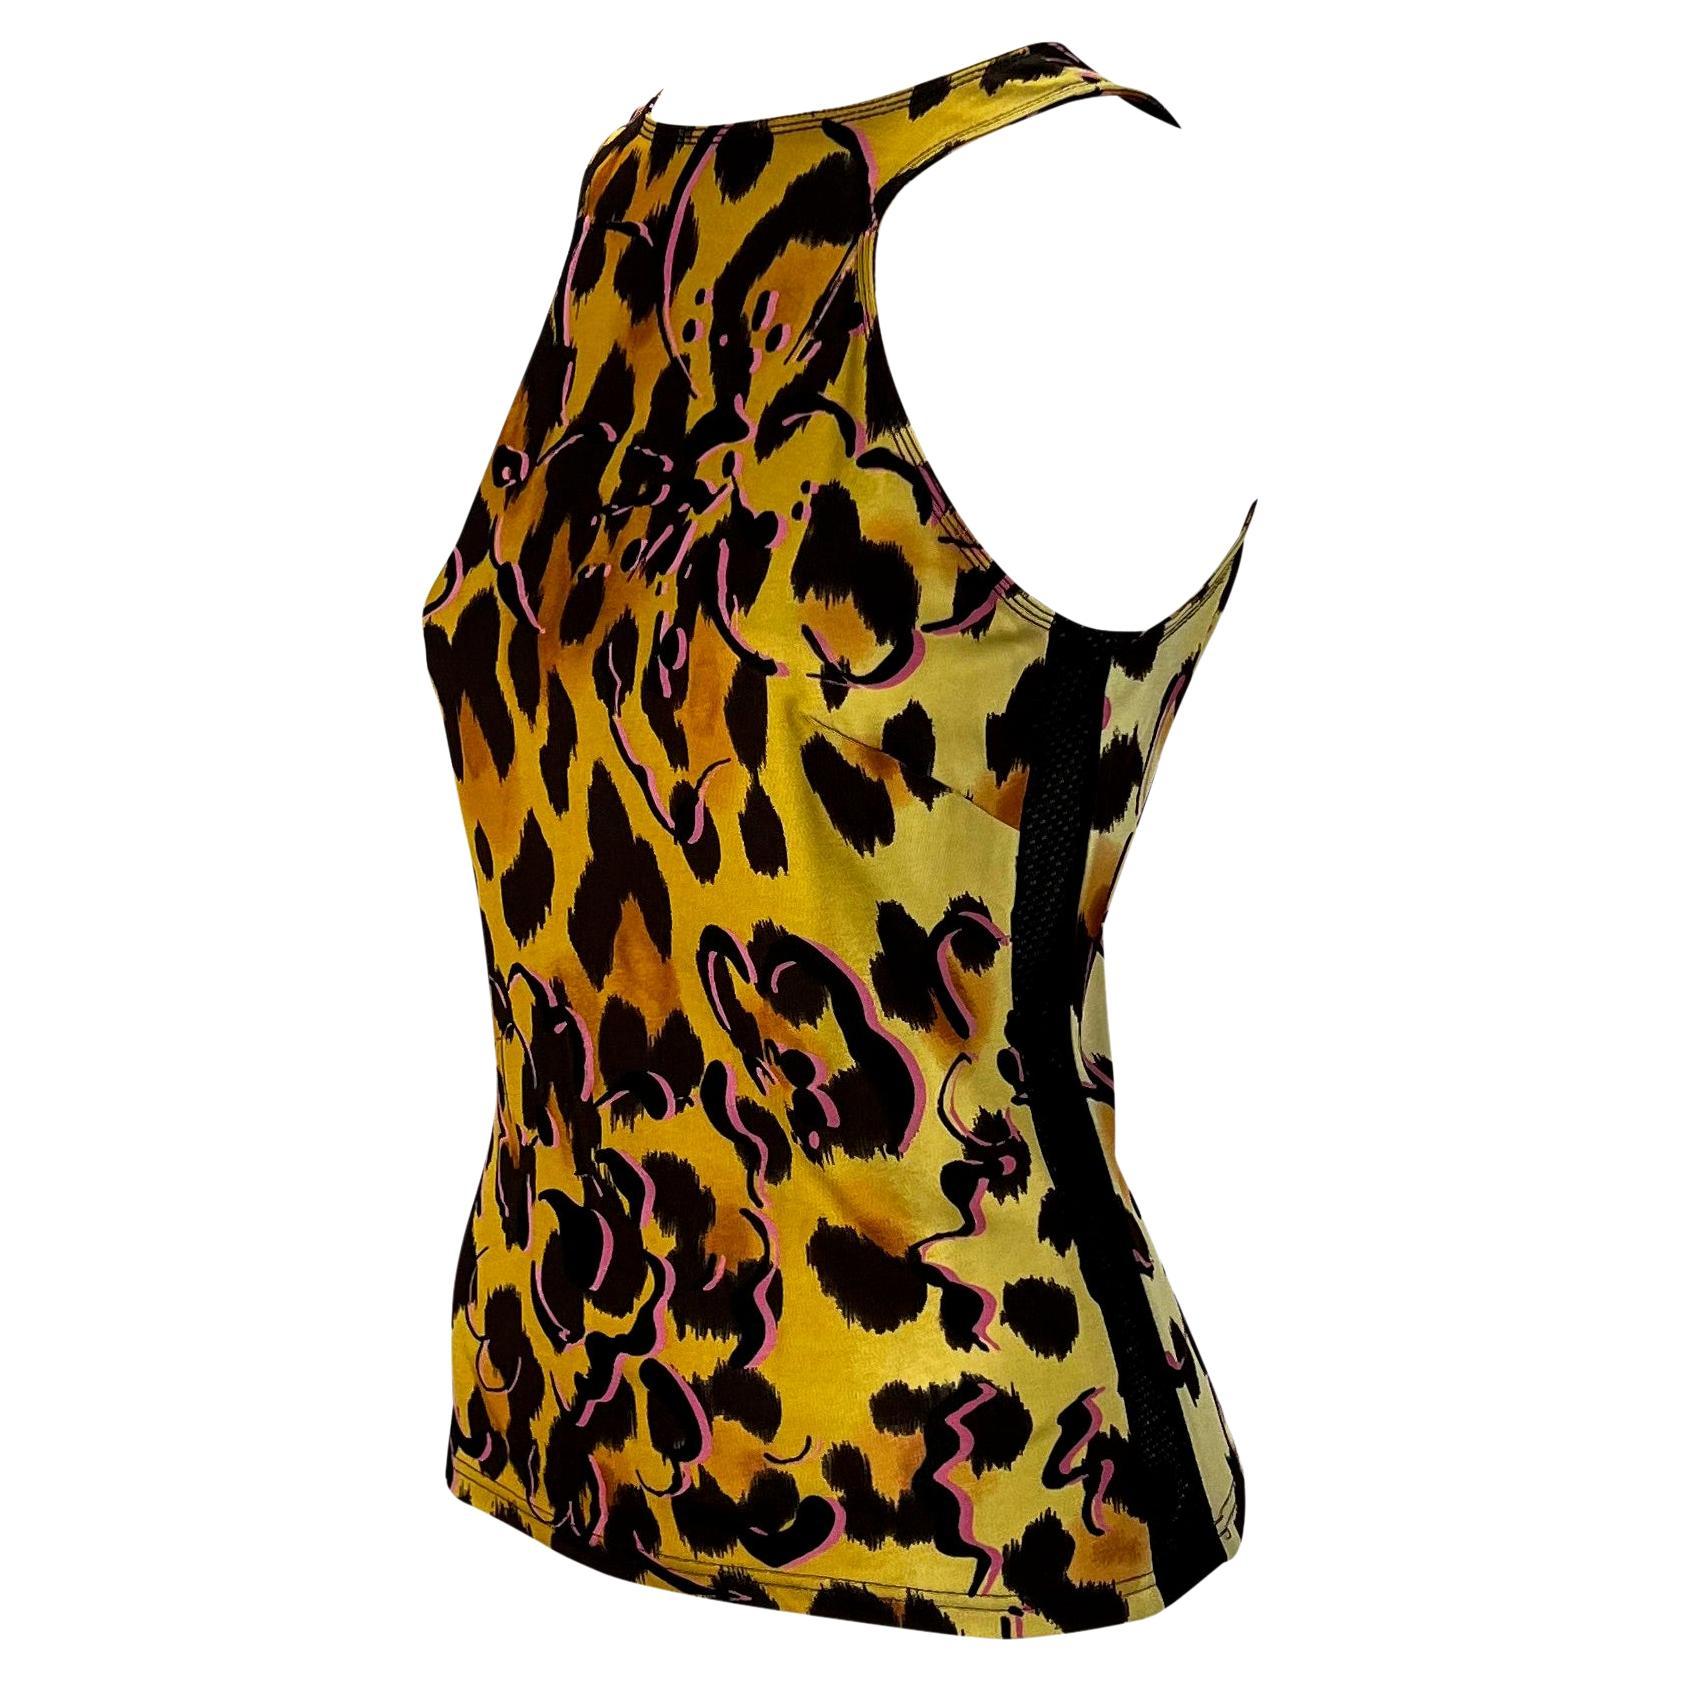 Presenting a fabulous cheetah print Gianni Versace Couture tank top, designed by Donatella Versace. From the Spring/Summer 2002 collection, this top is covered in a yellow cheetah print with pink flower outlines atop. The tank top features black